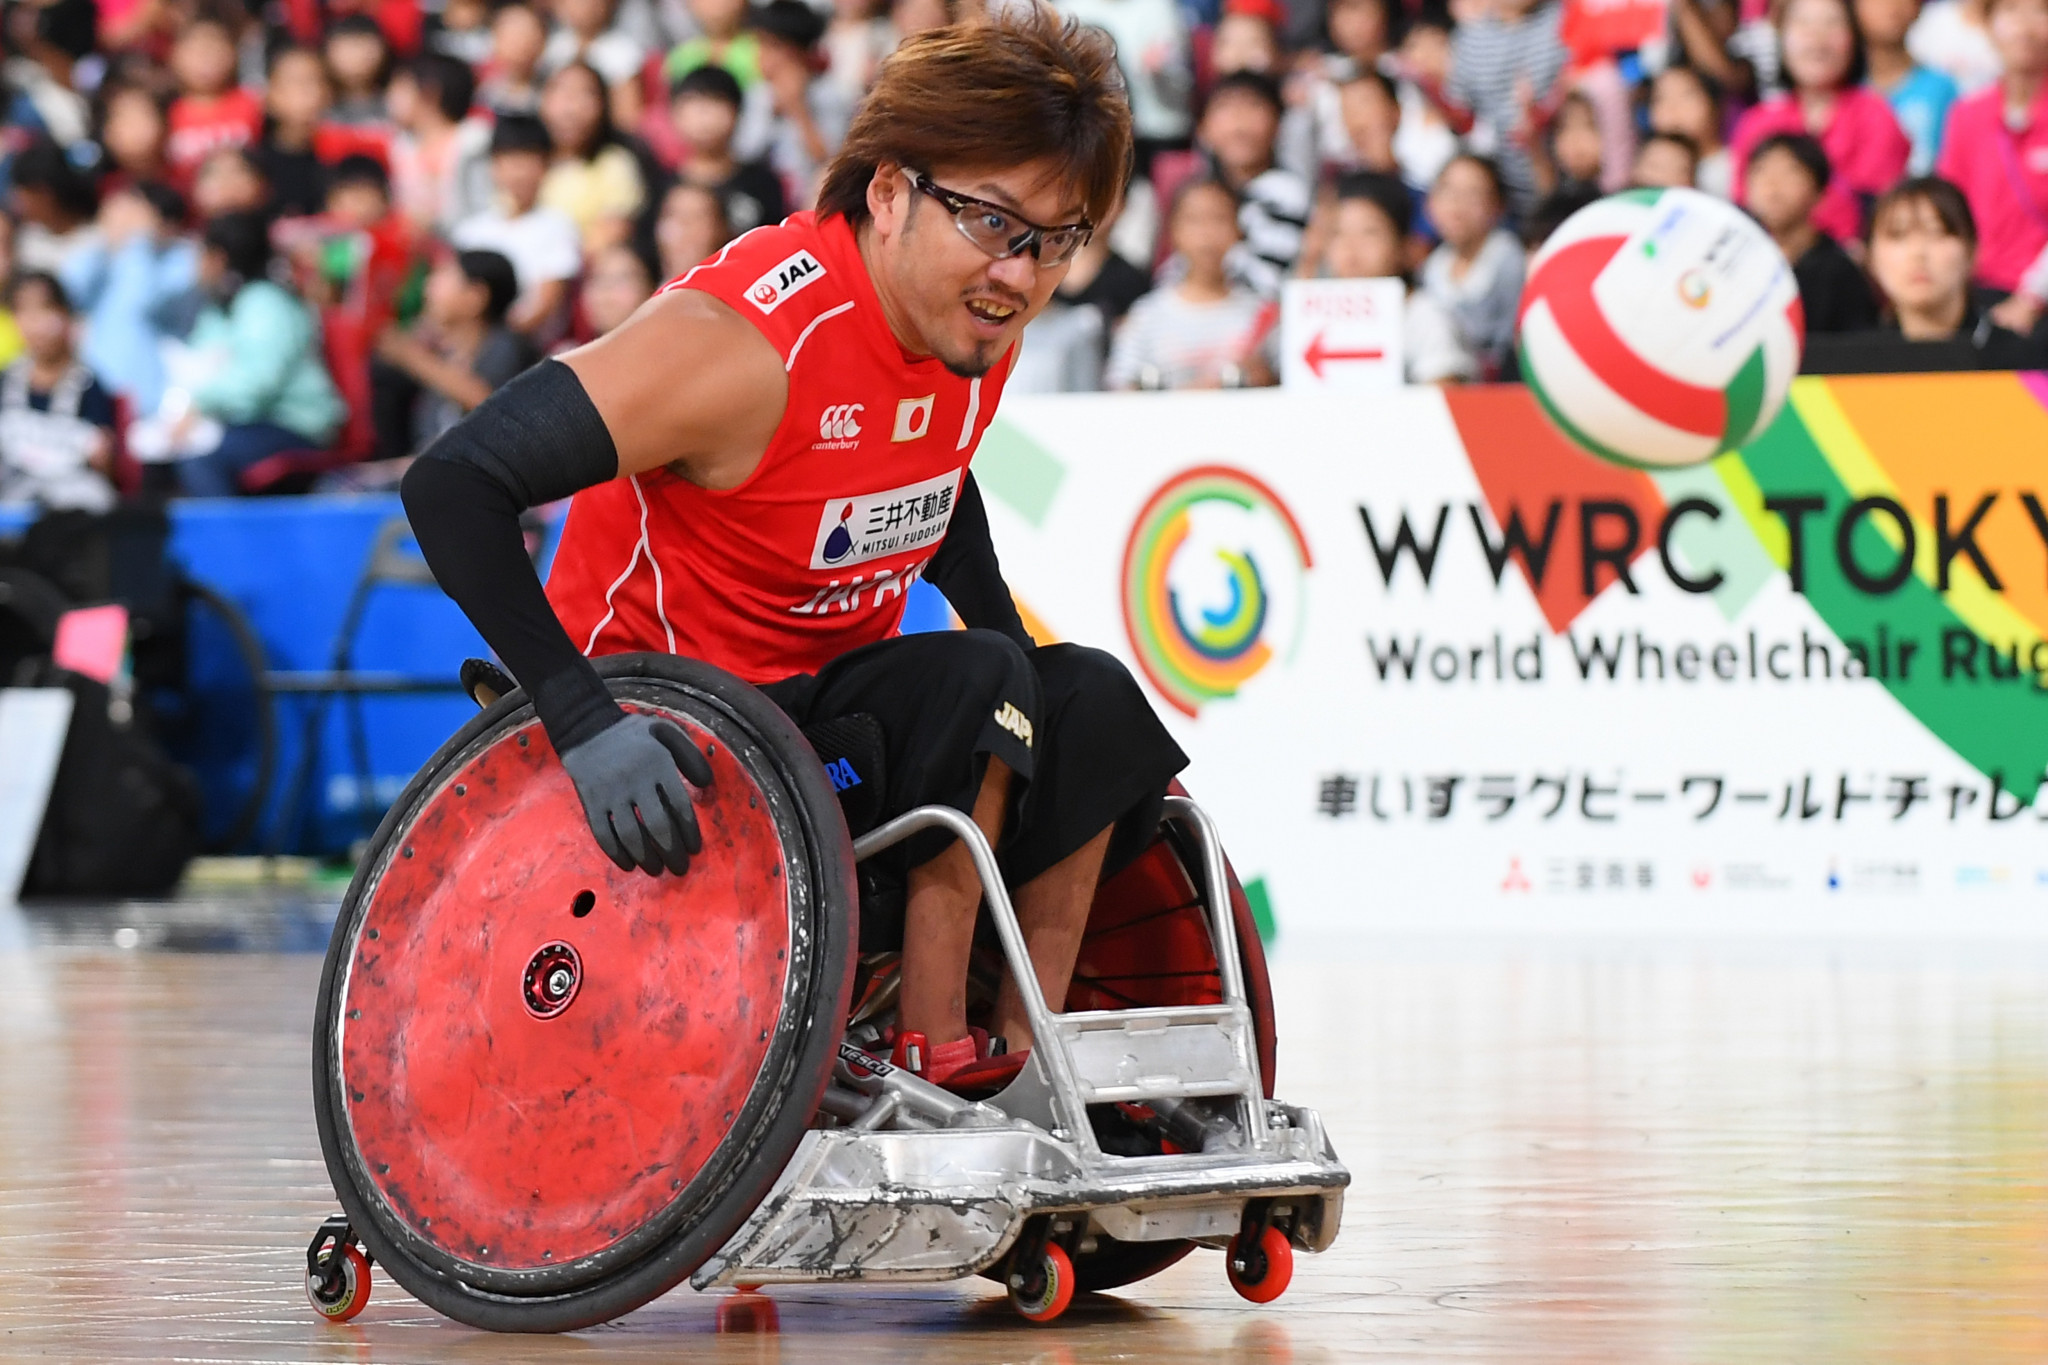 Training venue for both Olympians and Paralympians up and running in Tokyo